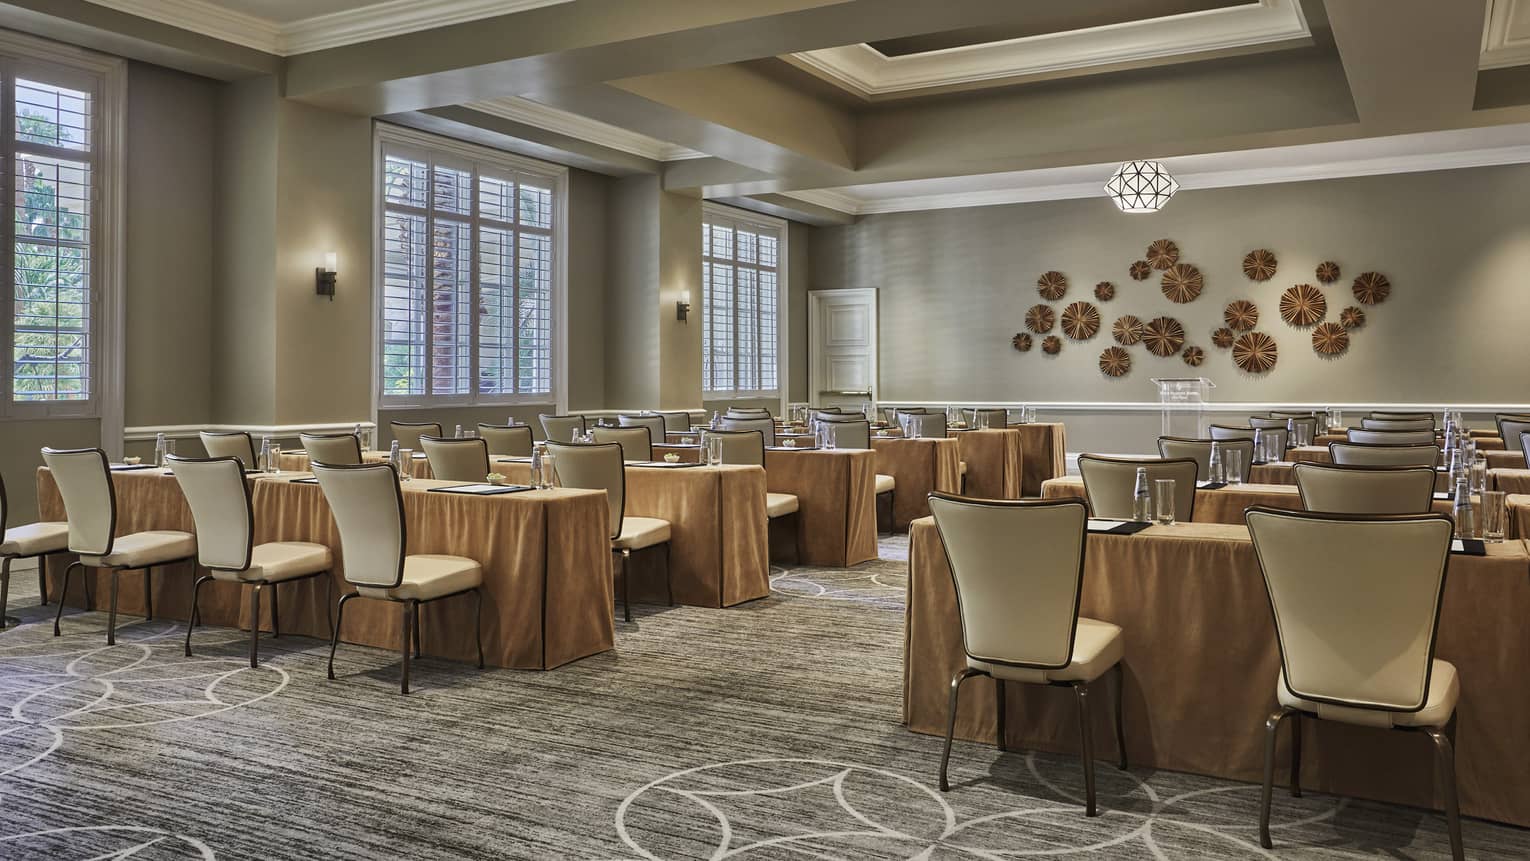 Palm Room conference, rows of meeting tables and chairs facing decorative wall